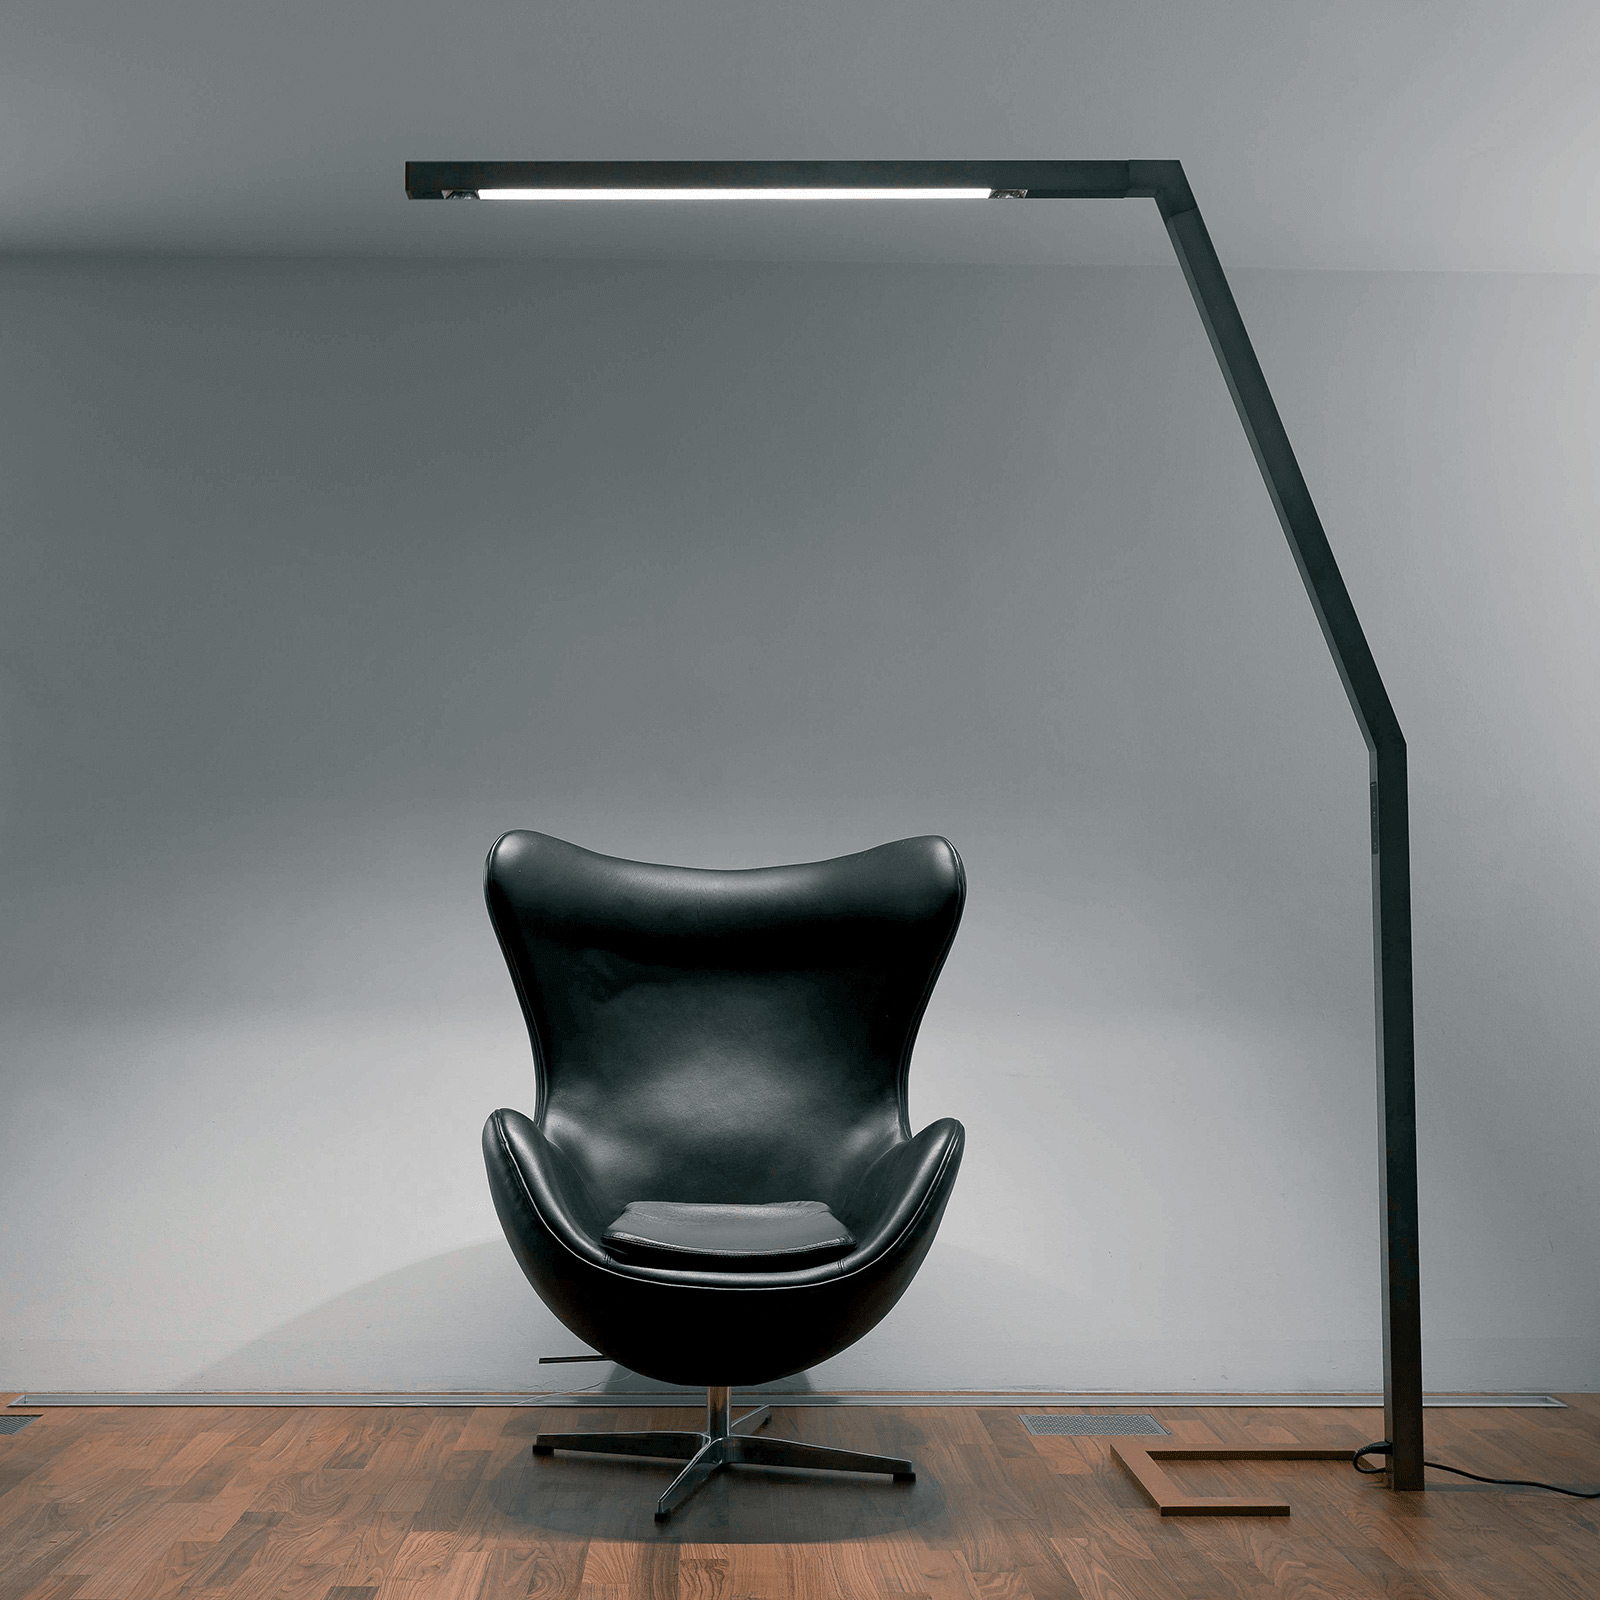 Hypro-F, Hypro, Prolicht, Light Project, Floor Lamp, HCL, Human Centric Lighting, Tuneable White, Tunable White, TW